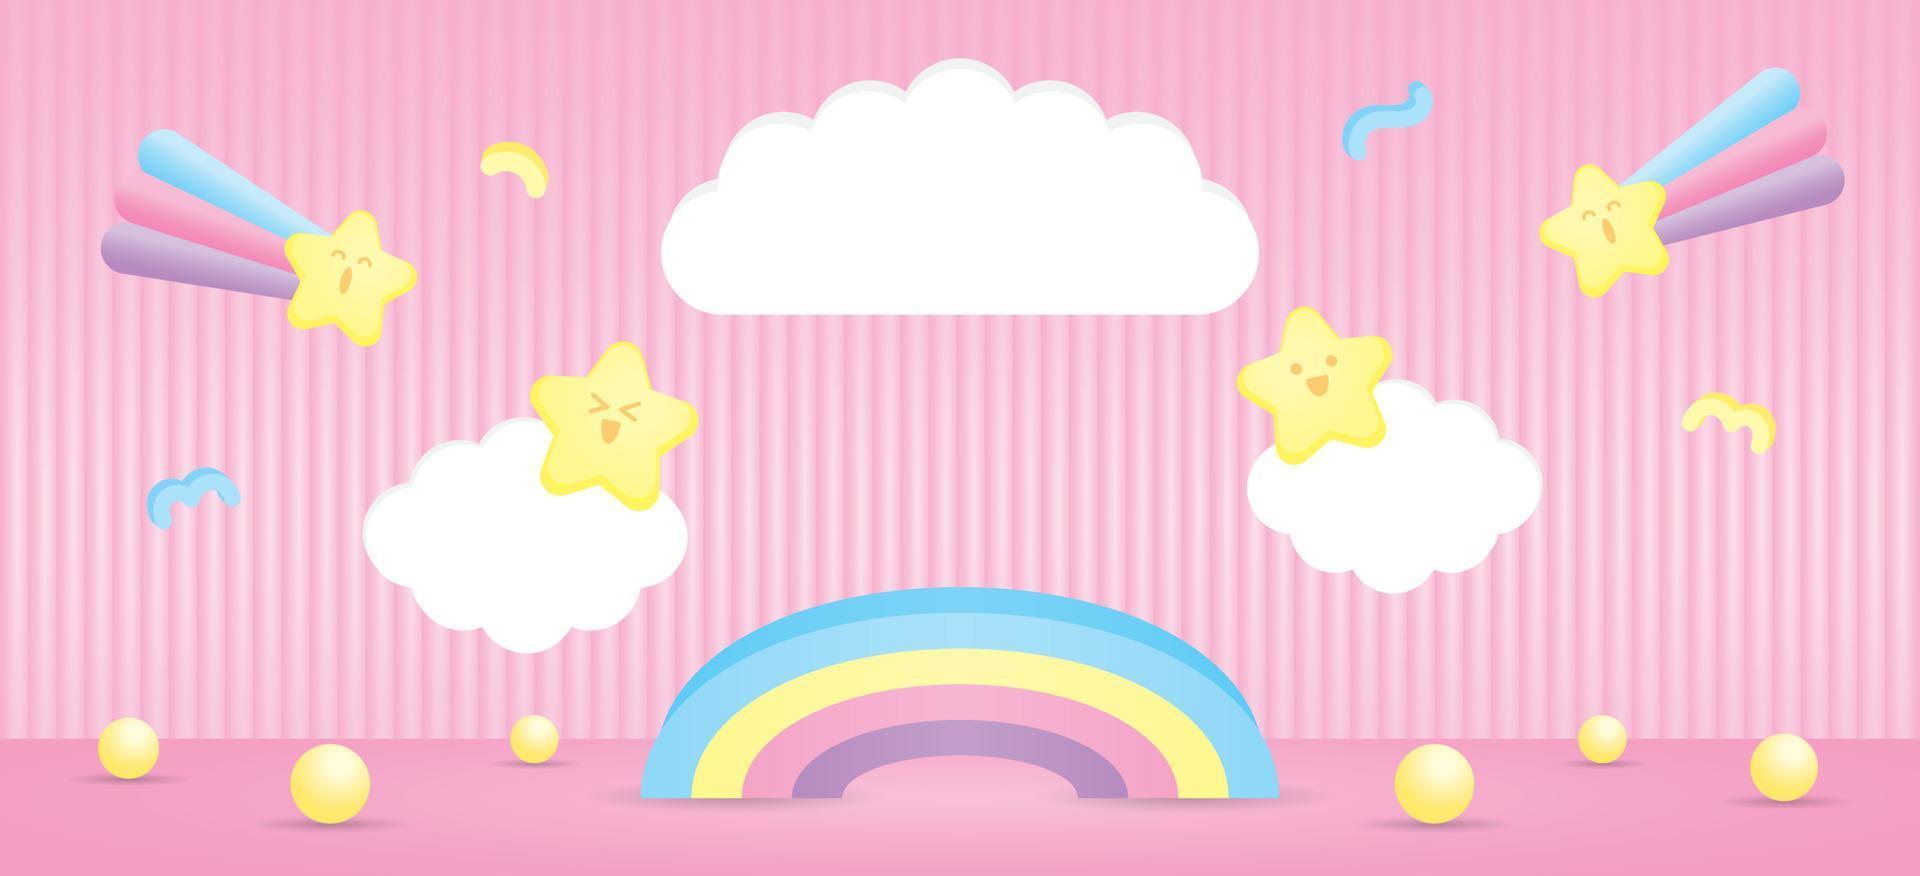 rainbow display stand with cloud sign and cute kawaii element on pastel pink floor and wall 3d illustration vector for putting object